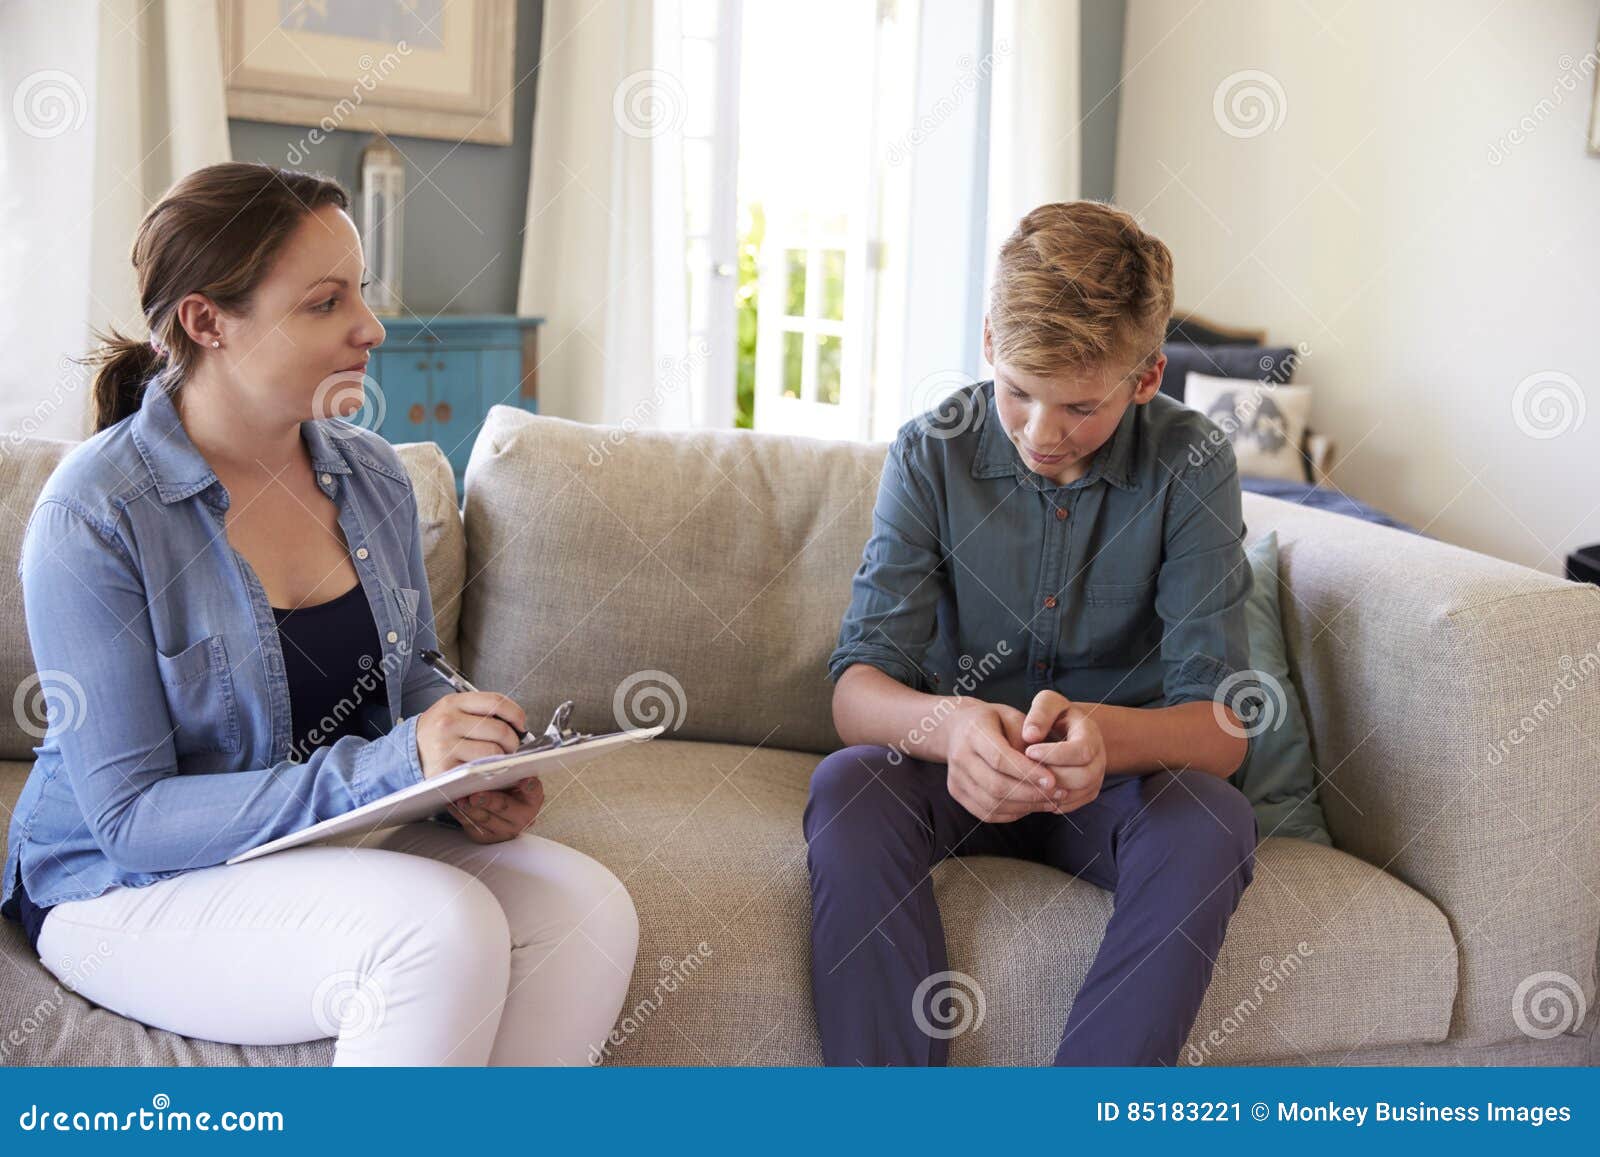 teenage boy with problem talking with counselor at home